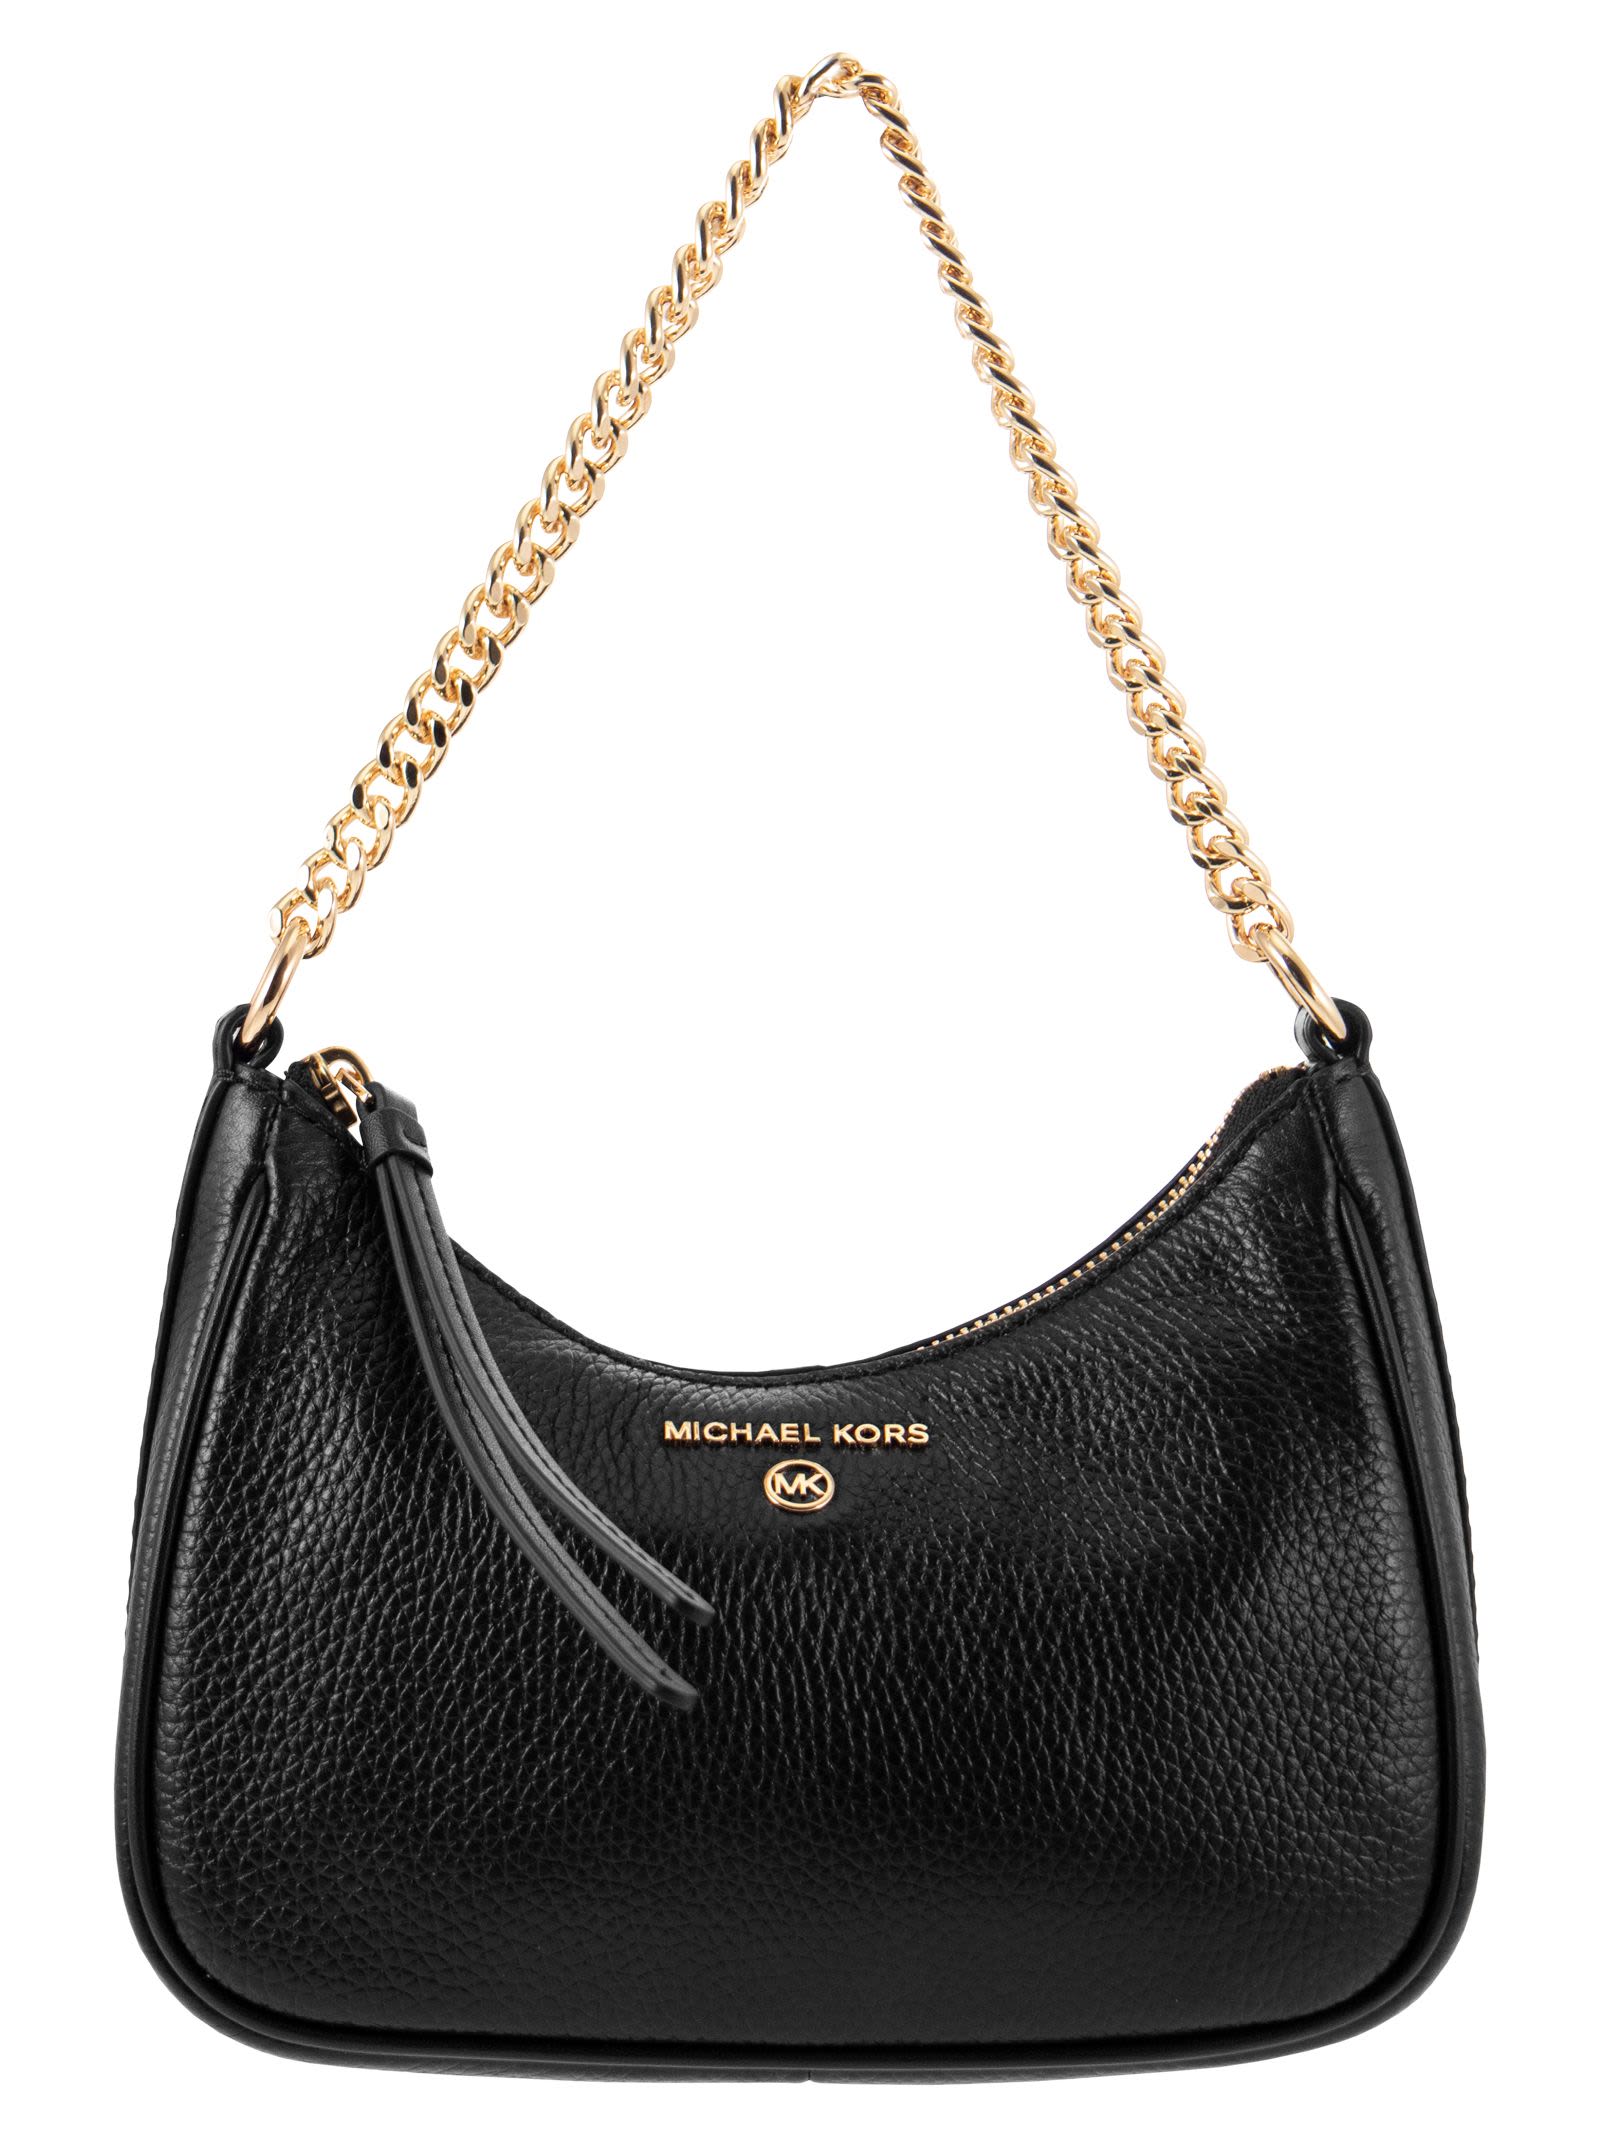 MICHAEL KORS SMALL SHOULDER BAG IN GRAINED LEATHER